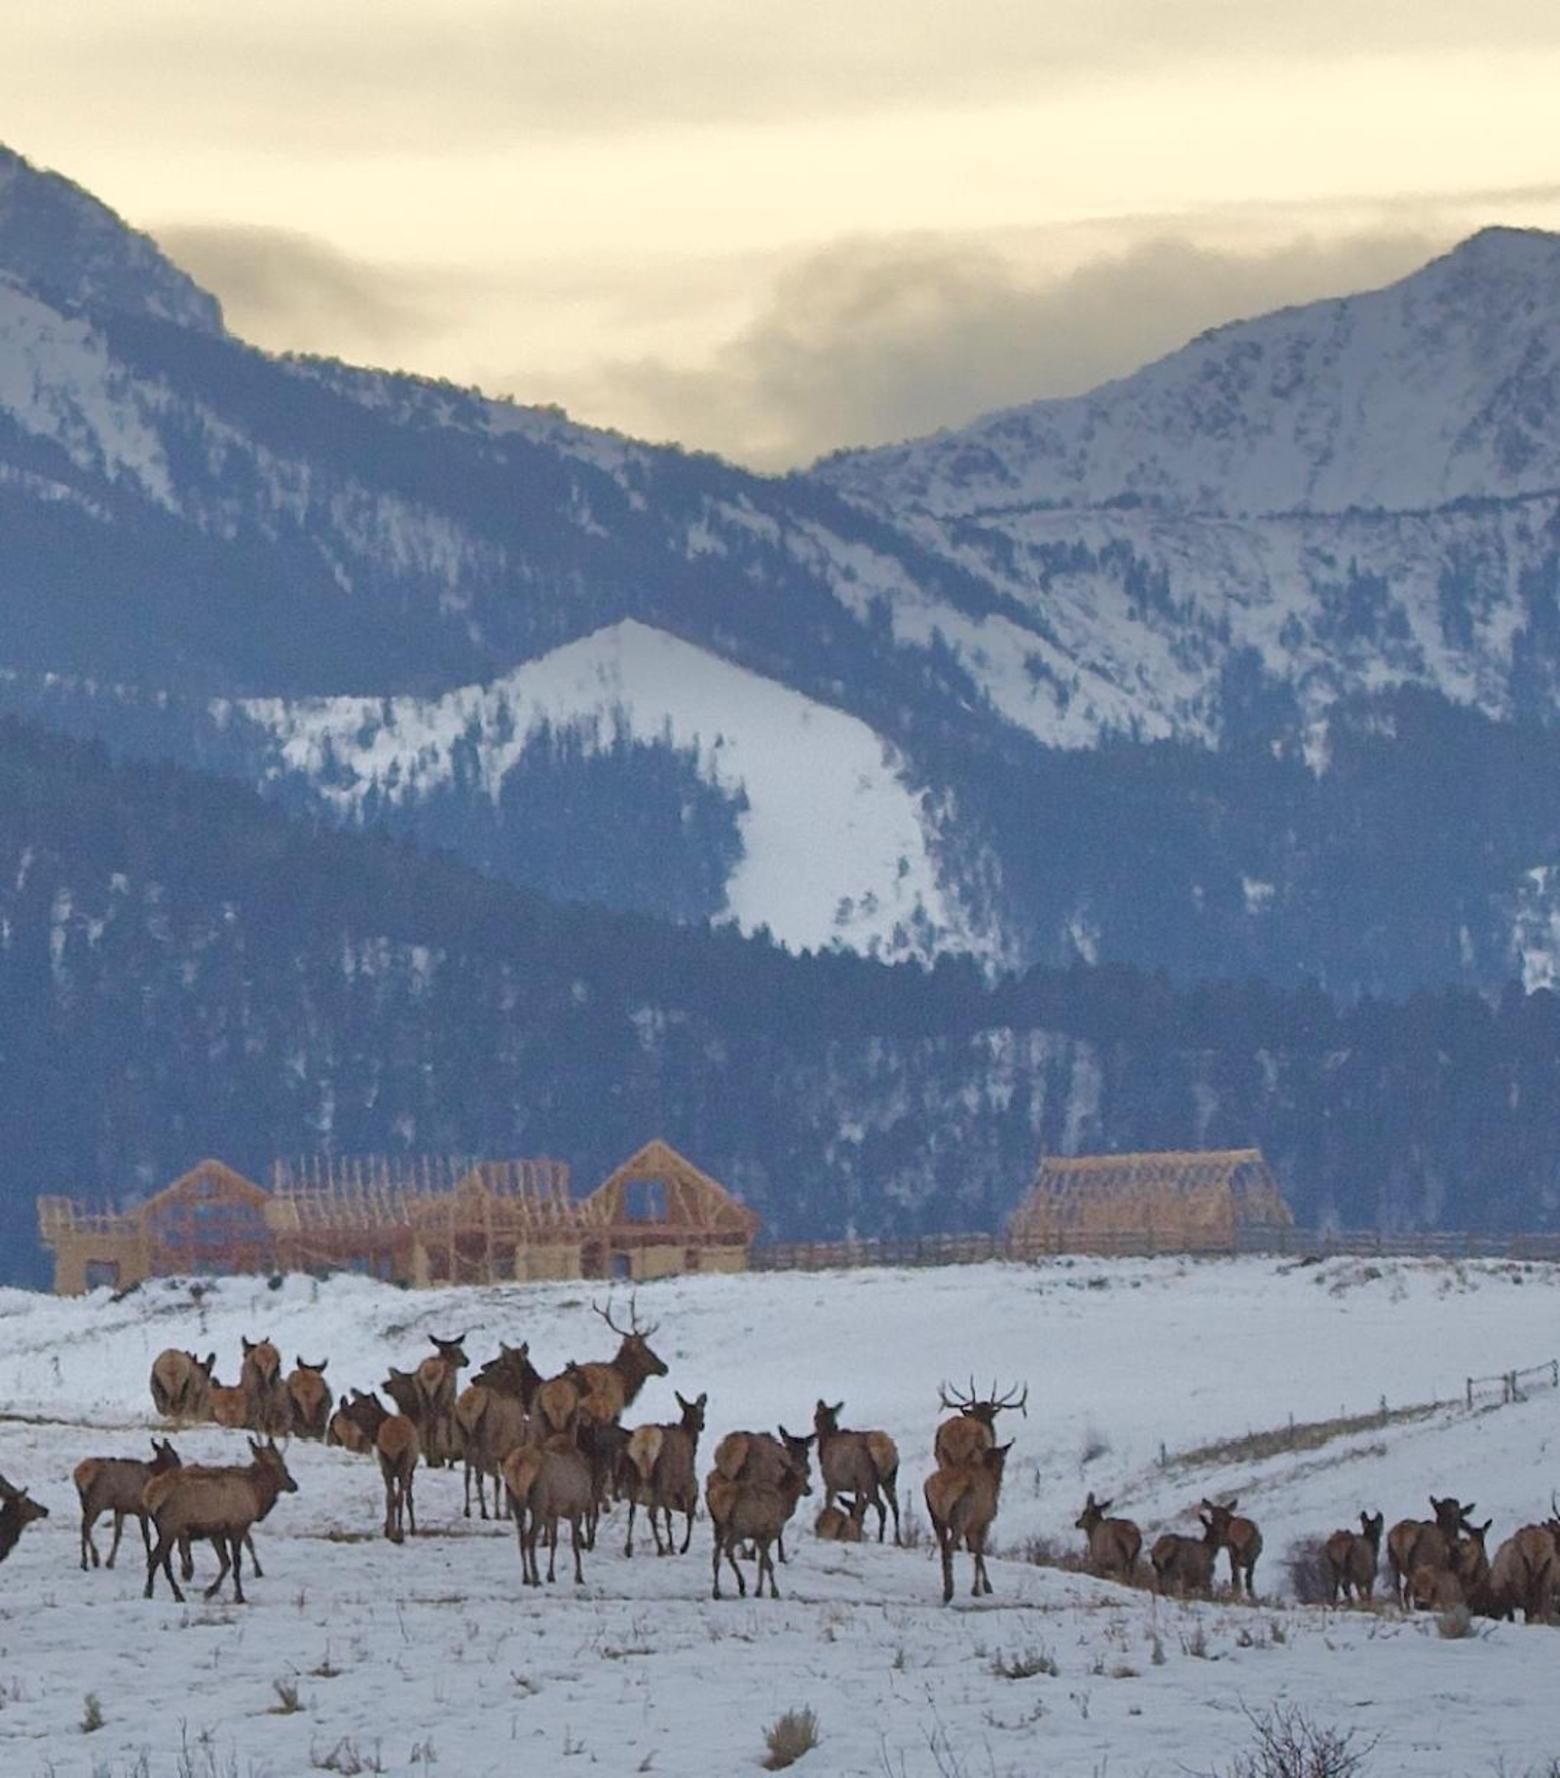 One glimpse of the kind of development rimming the Gallatin Valley on former farm and ranch lands located near the edge of the mountains where wildlife have gathered for centuries if not much longer. Photo courtesy Holly Pippel